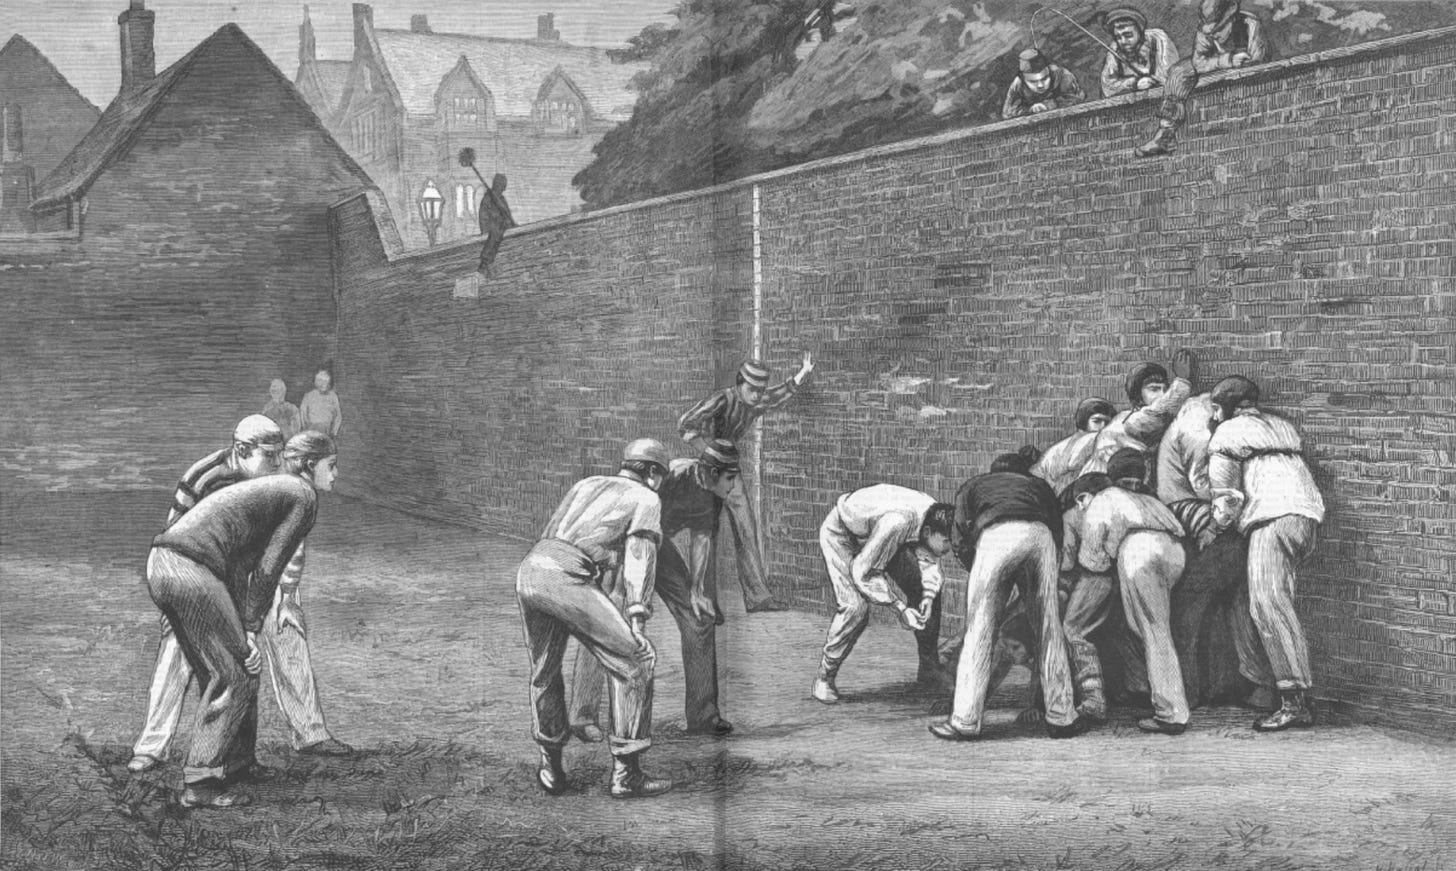 Wall Game by Harper’s Weekly, 1876